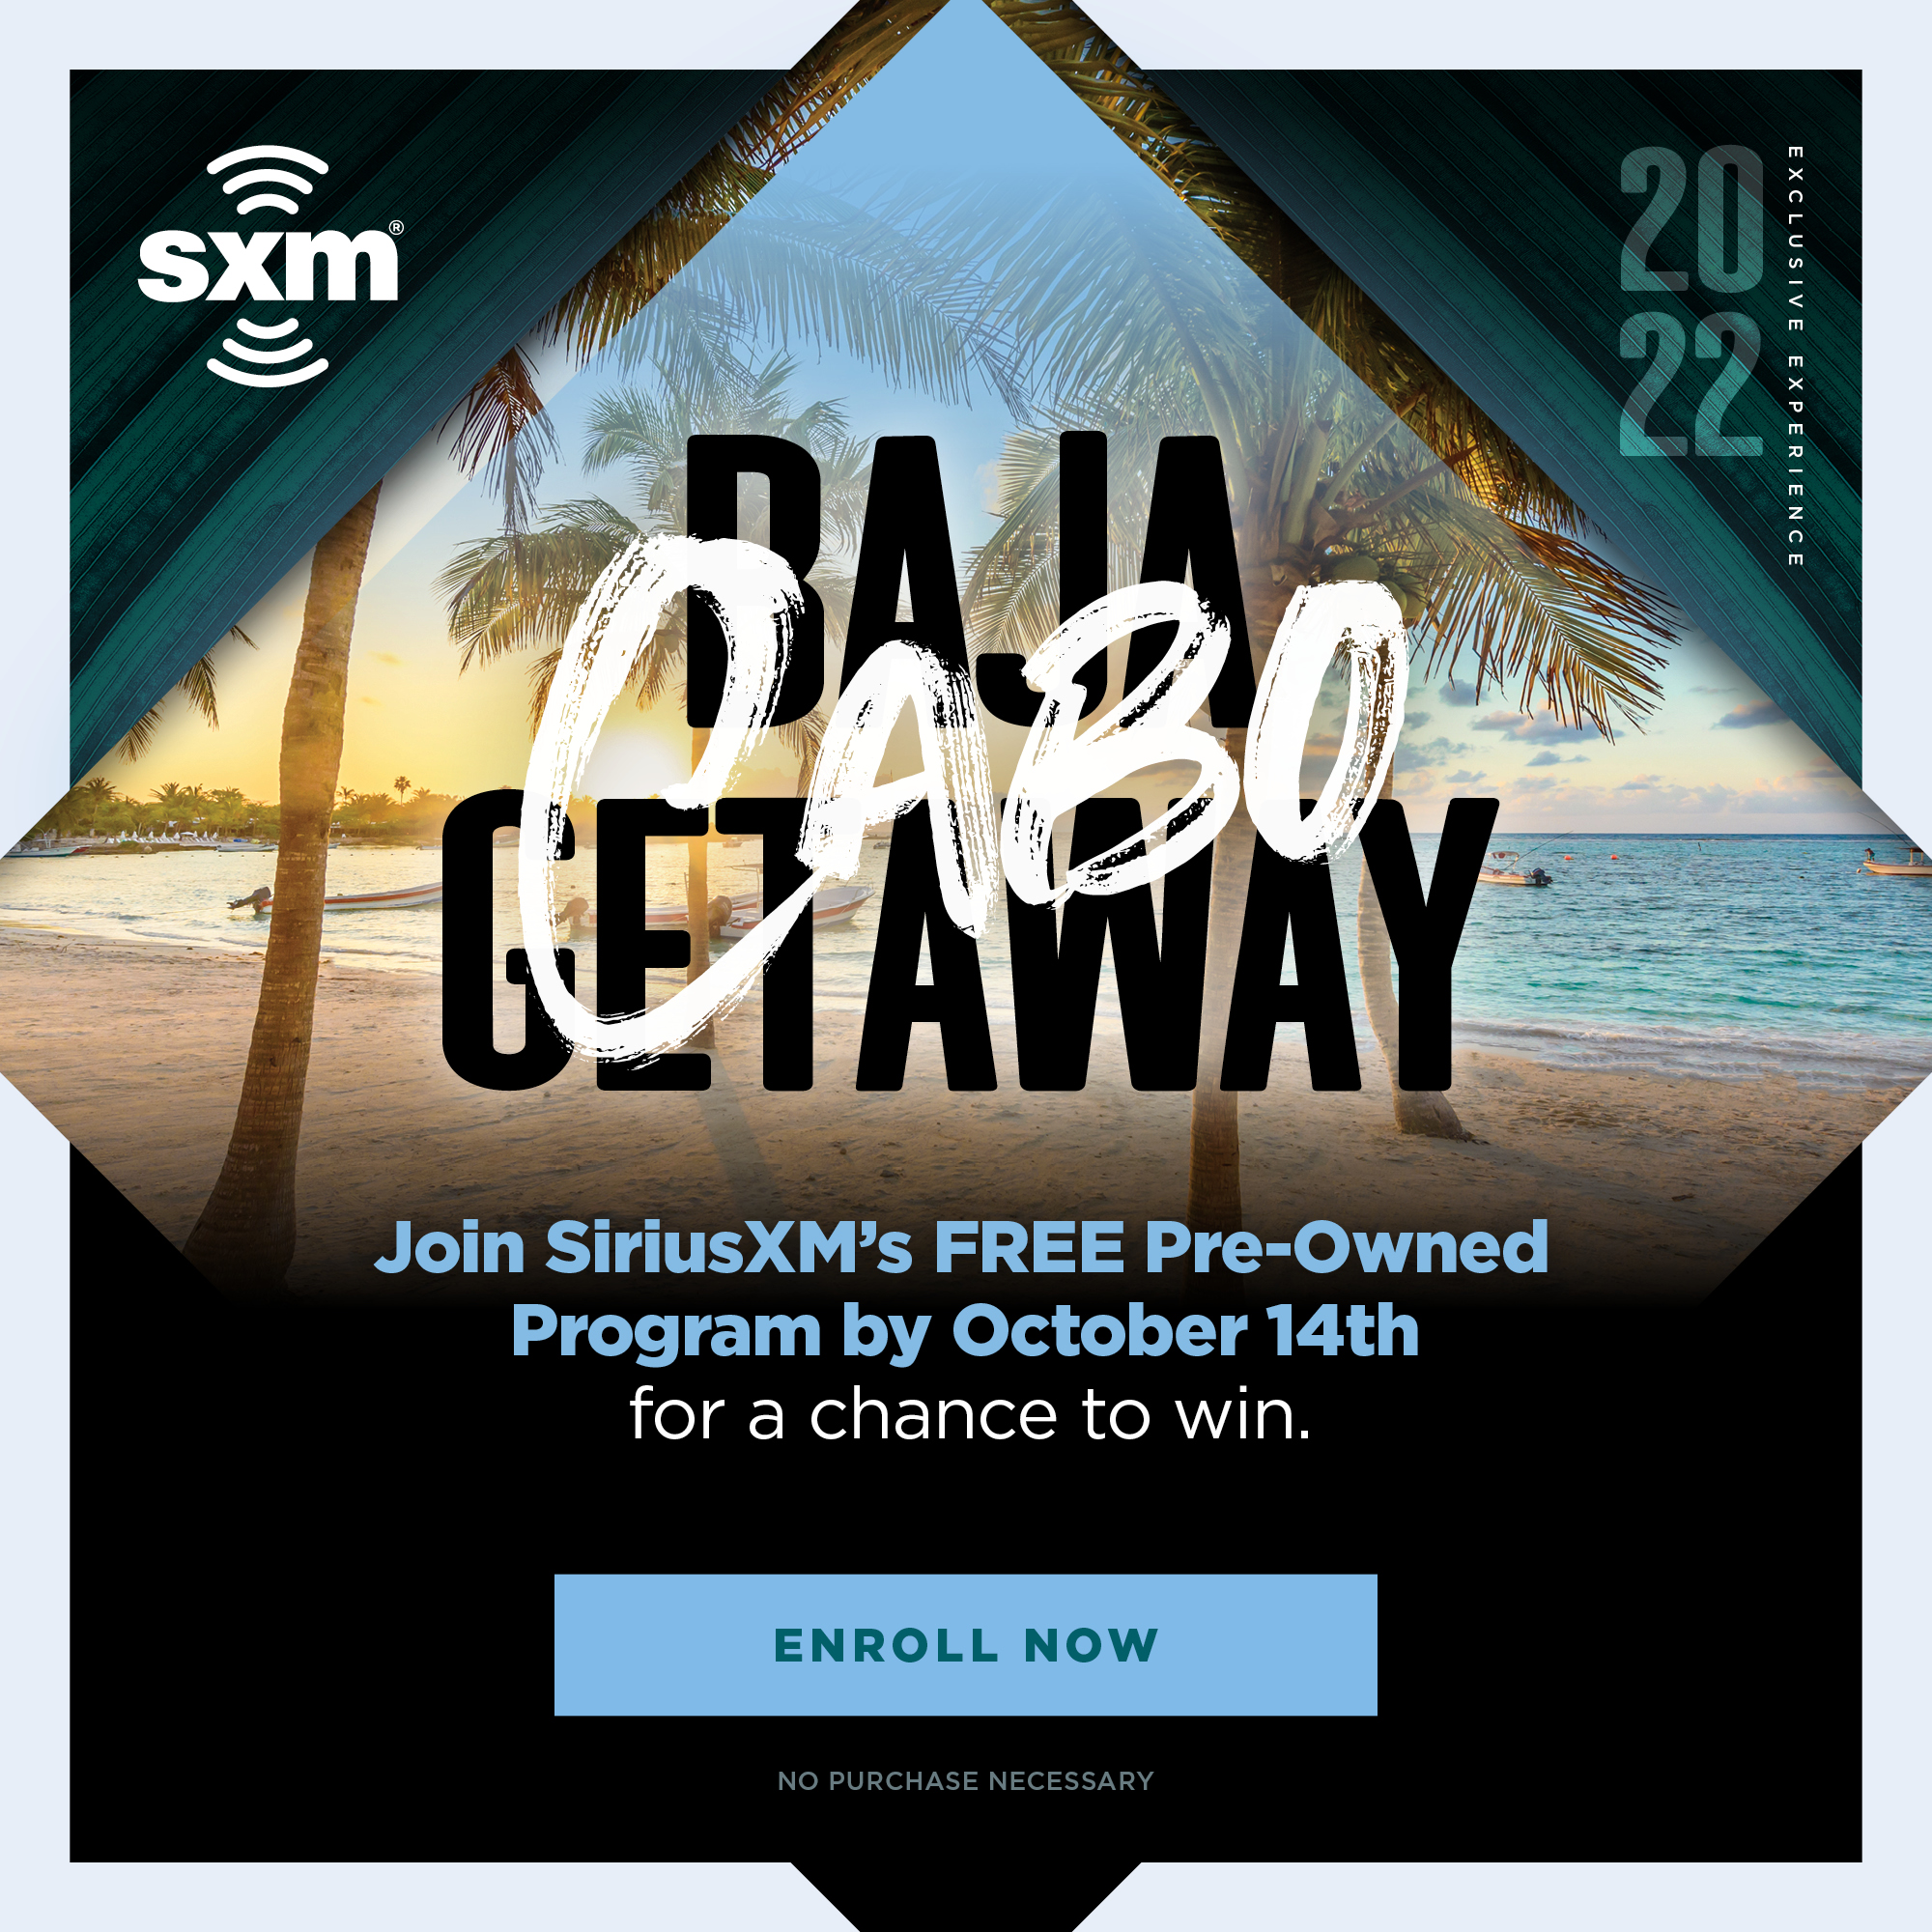 Join by October 14th for a chance to win a luxurious all-inclusive resort getaway to Los Cabos, Mexico.